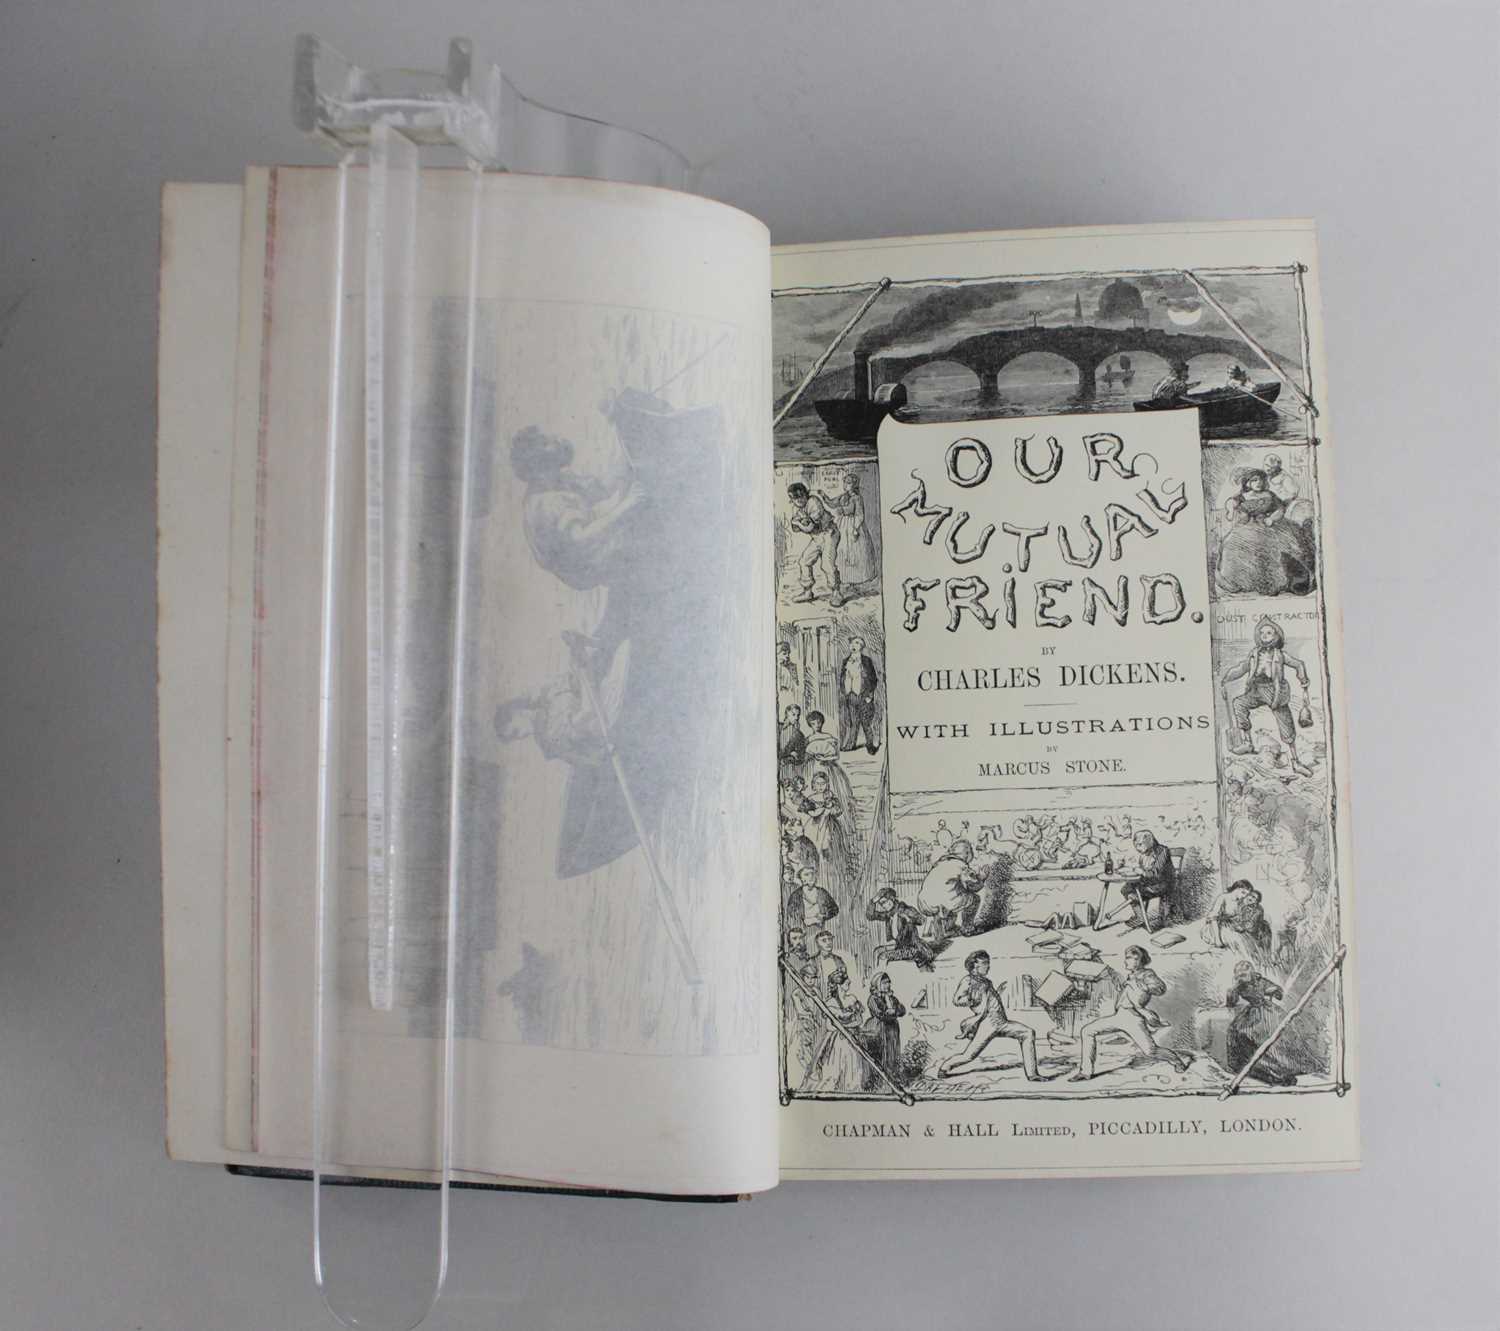 Charles Dickens, seven early volumes including Bleak House, Our Mutual Friend, Dombey and Son with - Image 4 of 5